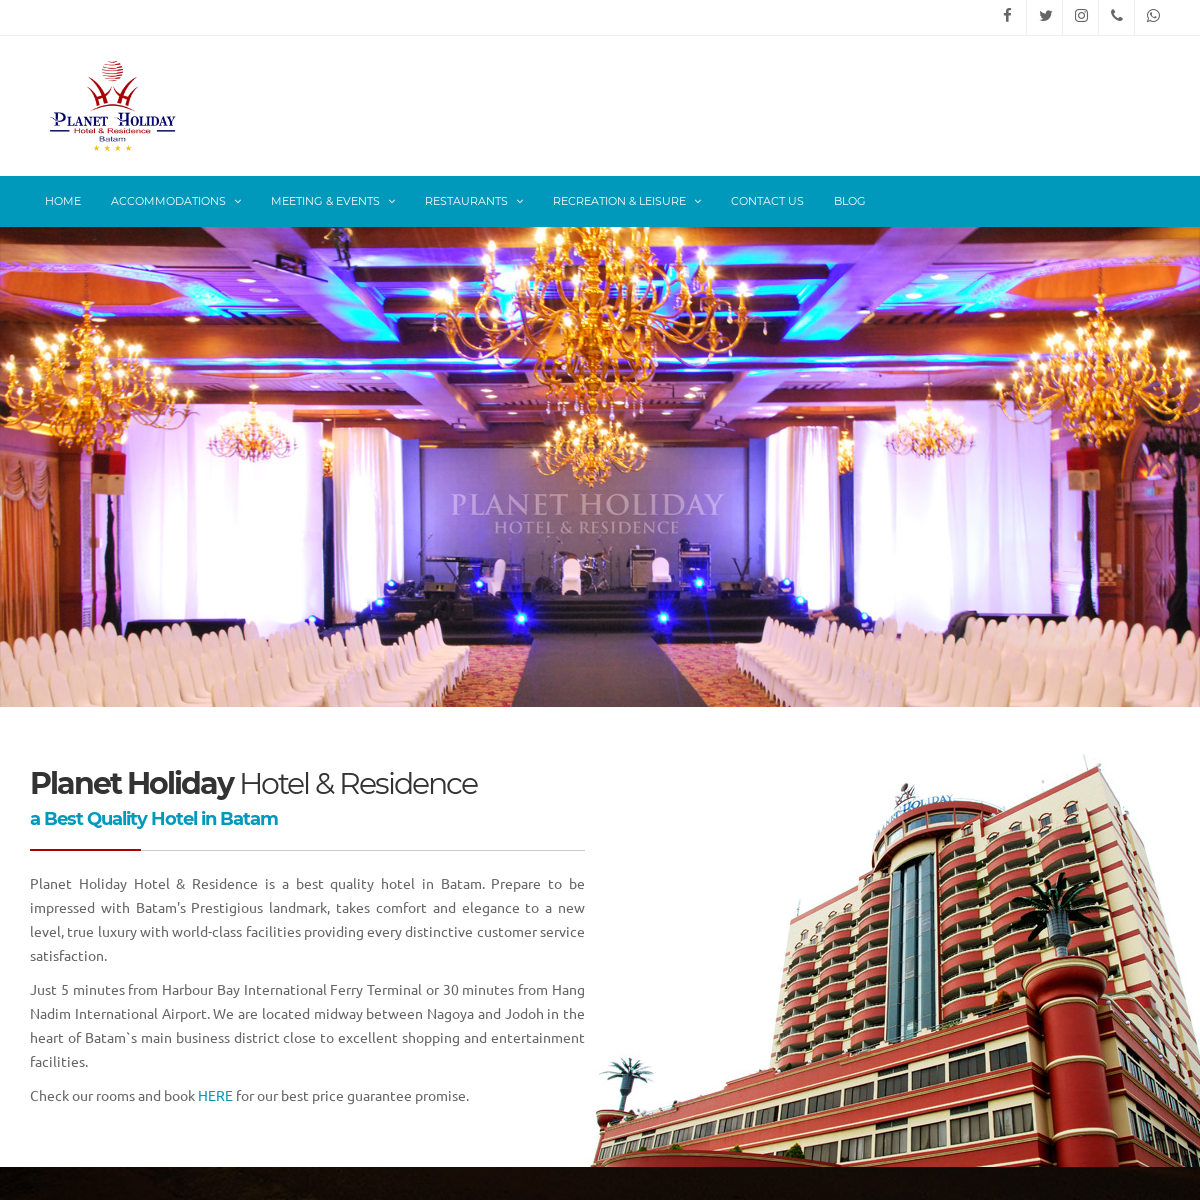 Planet Holiday Hotel & Residence Batam a Best Quality Hotel in Batam